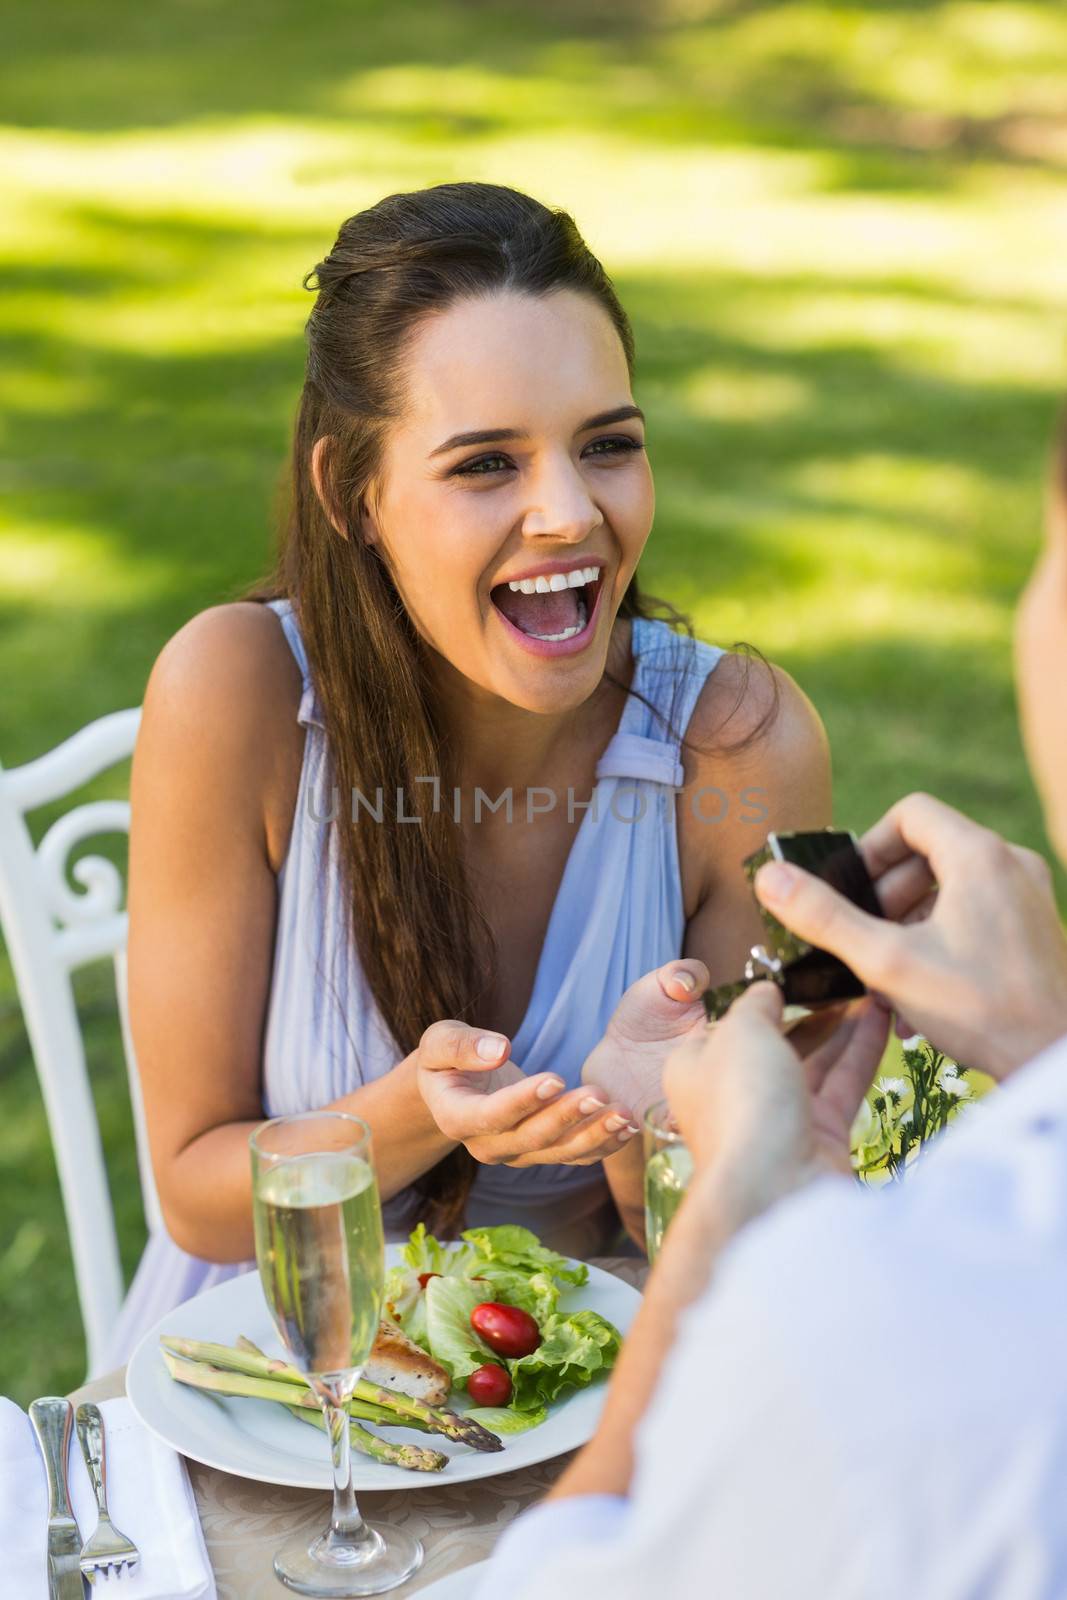 Man proposing cheerful woman at an outdoor caf├® by Wavebreakmedia